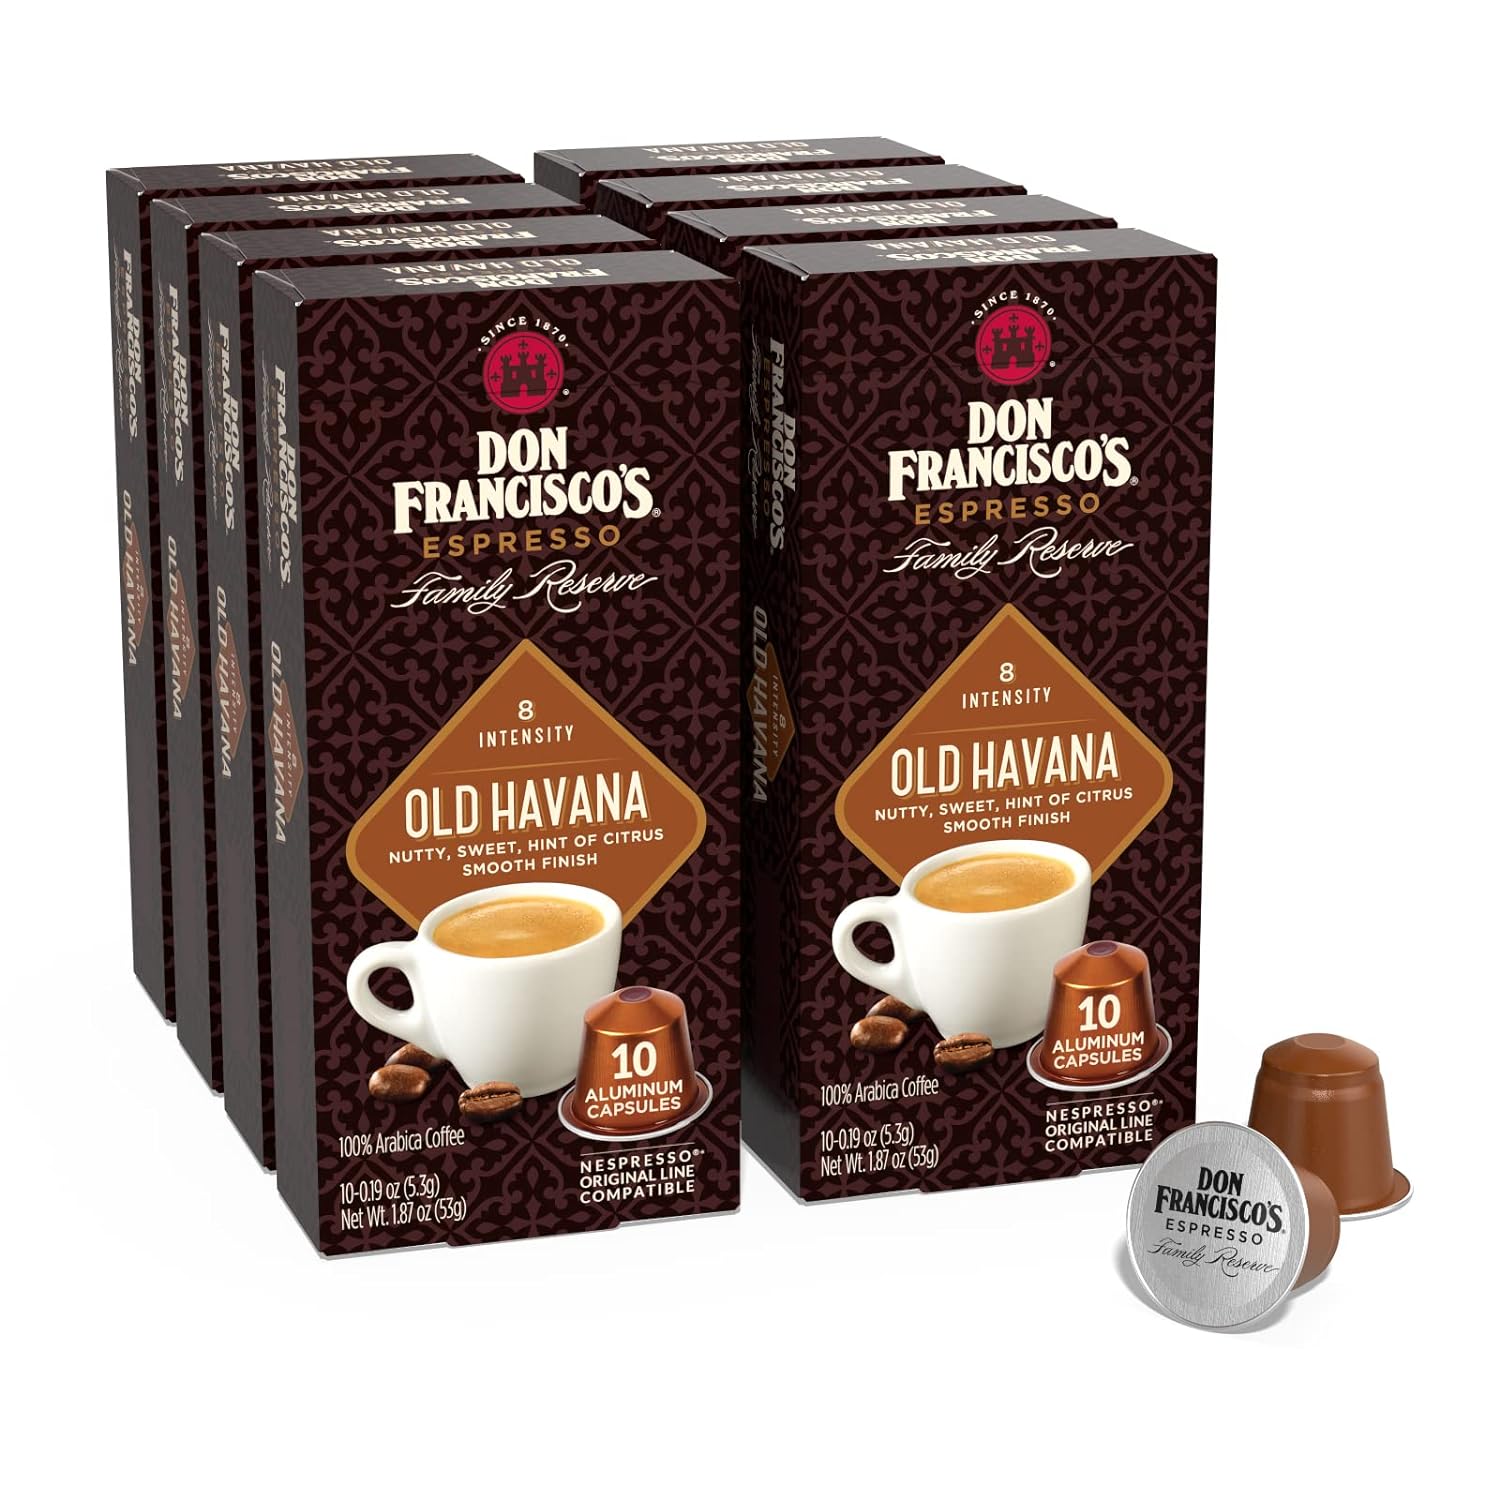 Don Francisco’s Old Havana Espresso Capsules, 80-Count Aluminum Recyclable Pods, Intensity 8, Compatible with Original Nespresso Machines